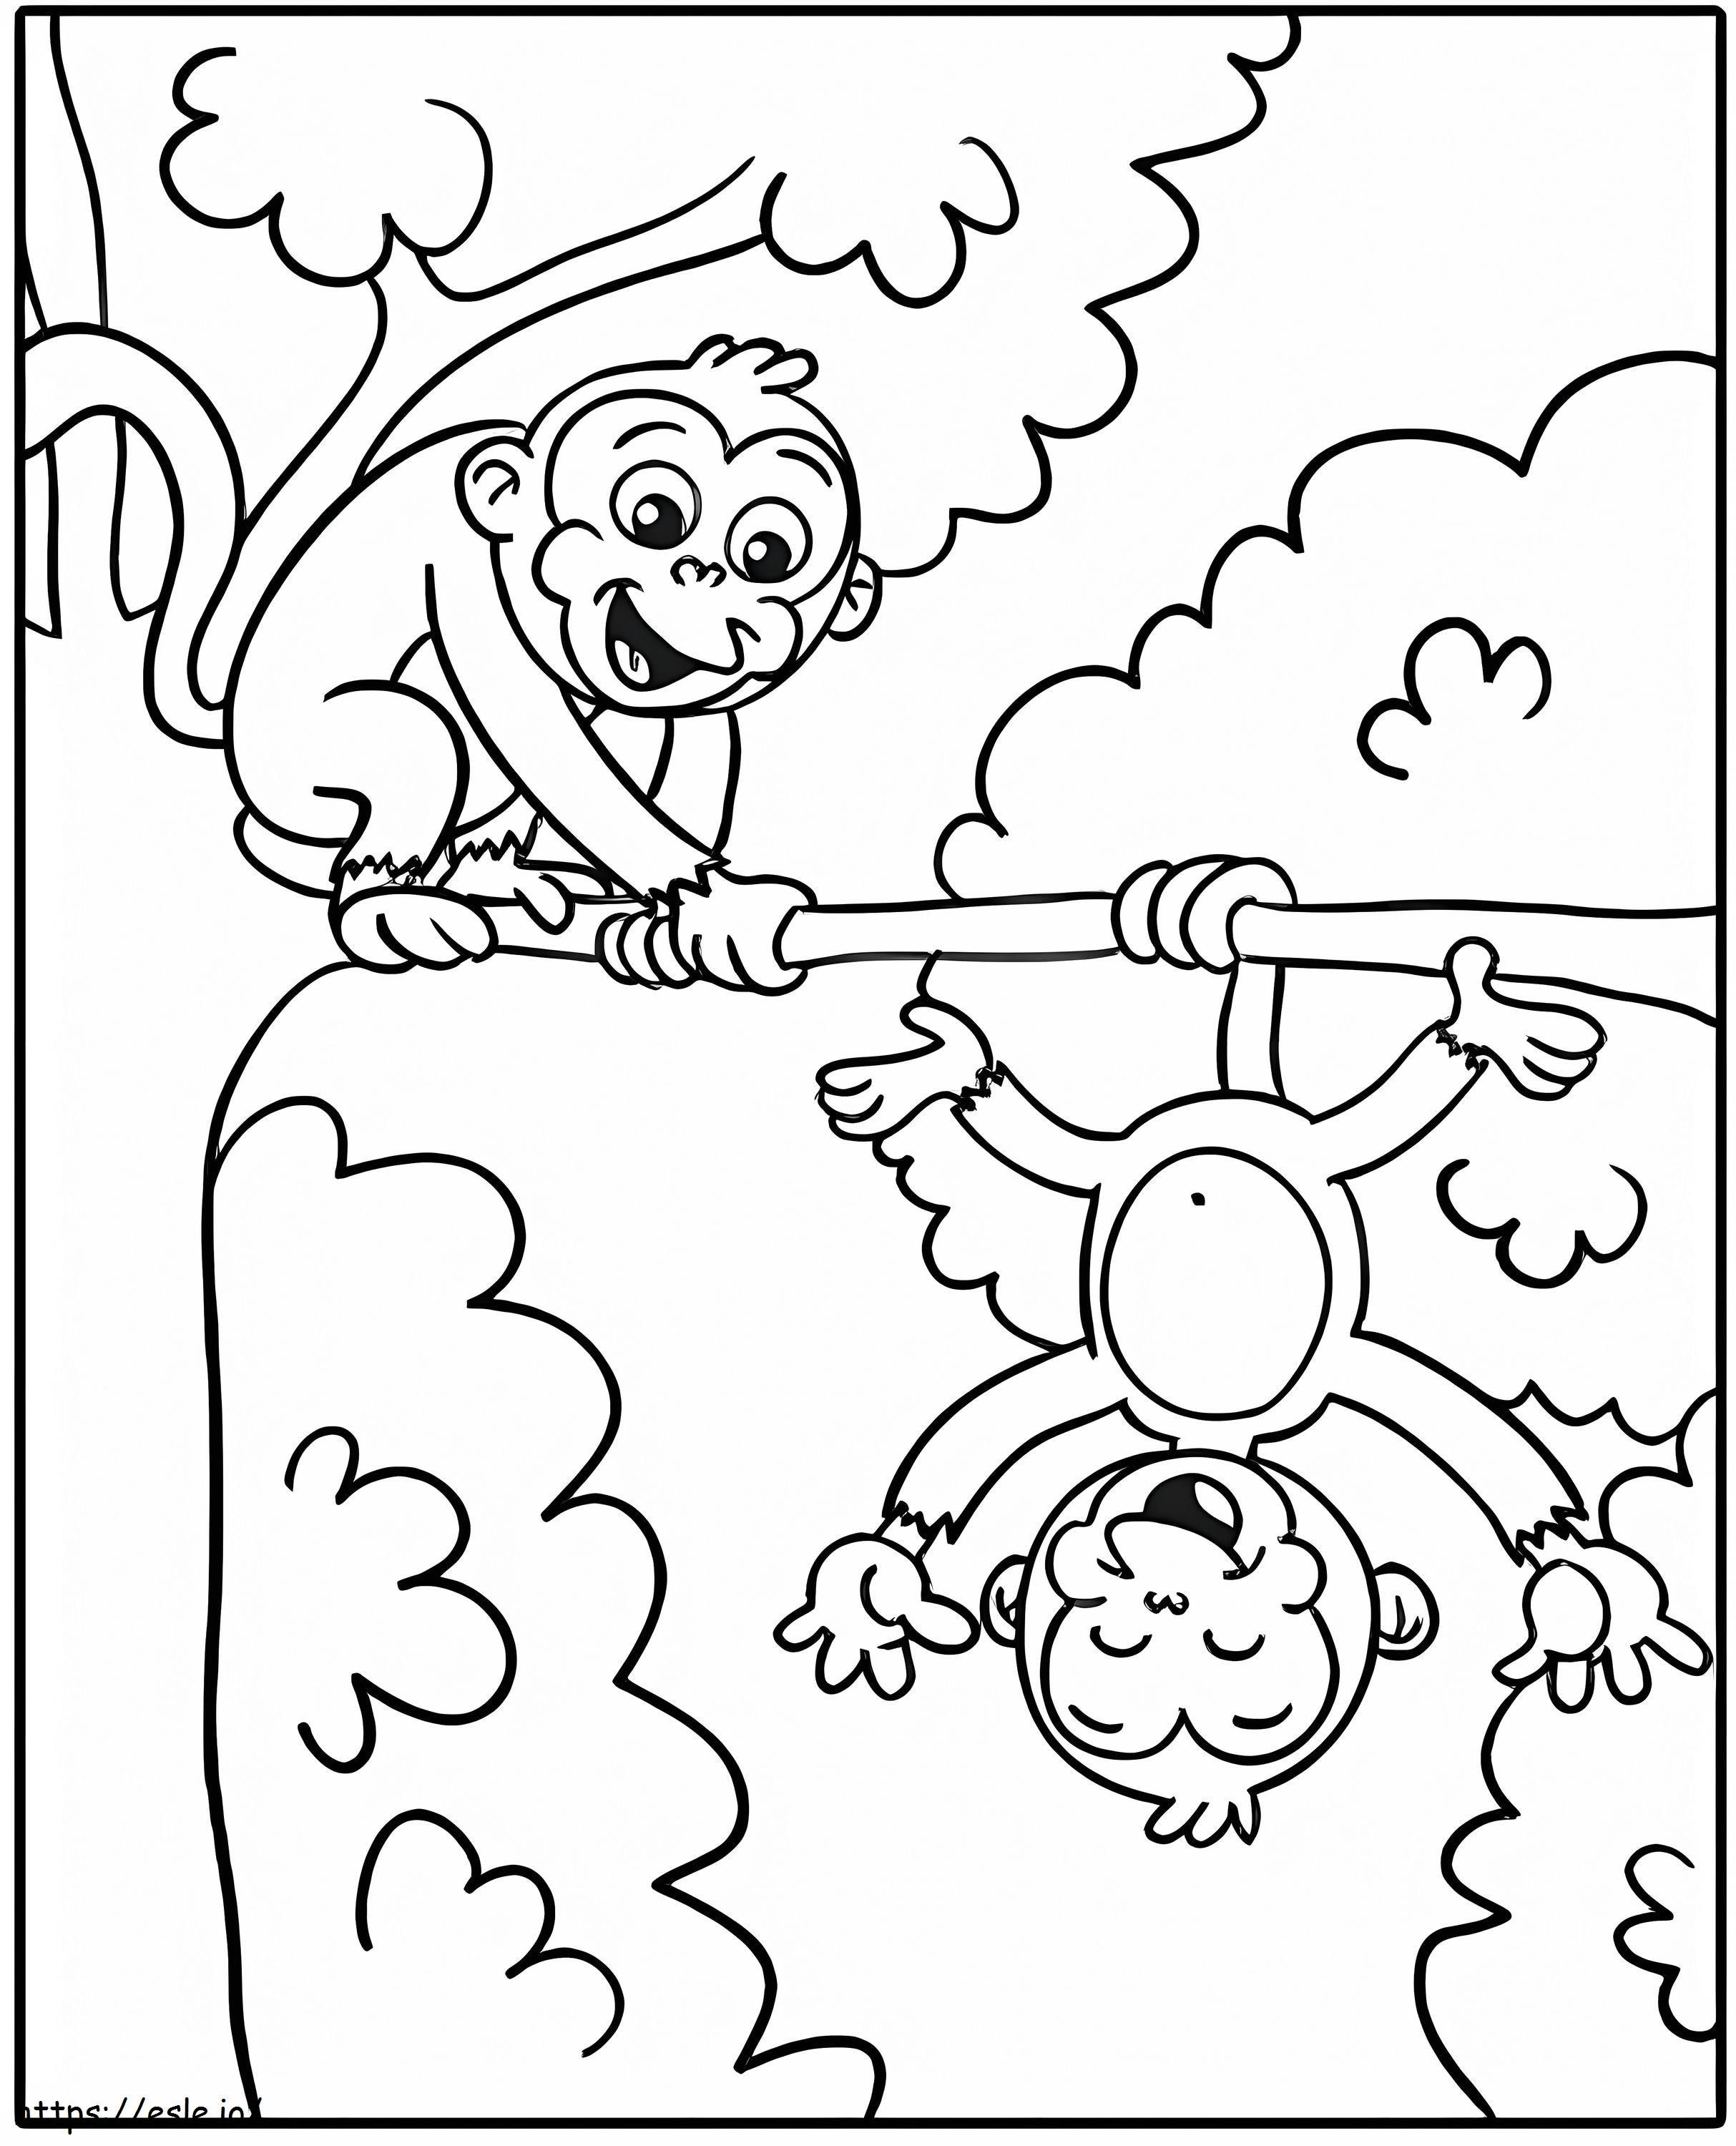 Two Funny Monkeys coloring page